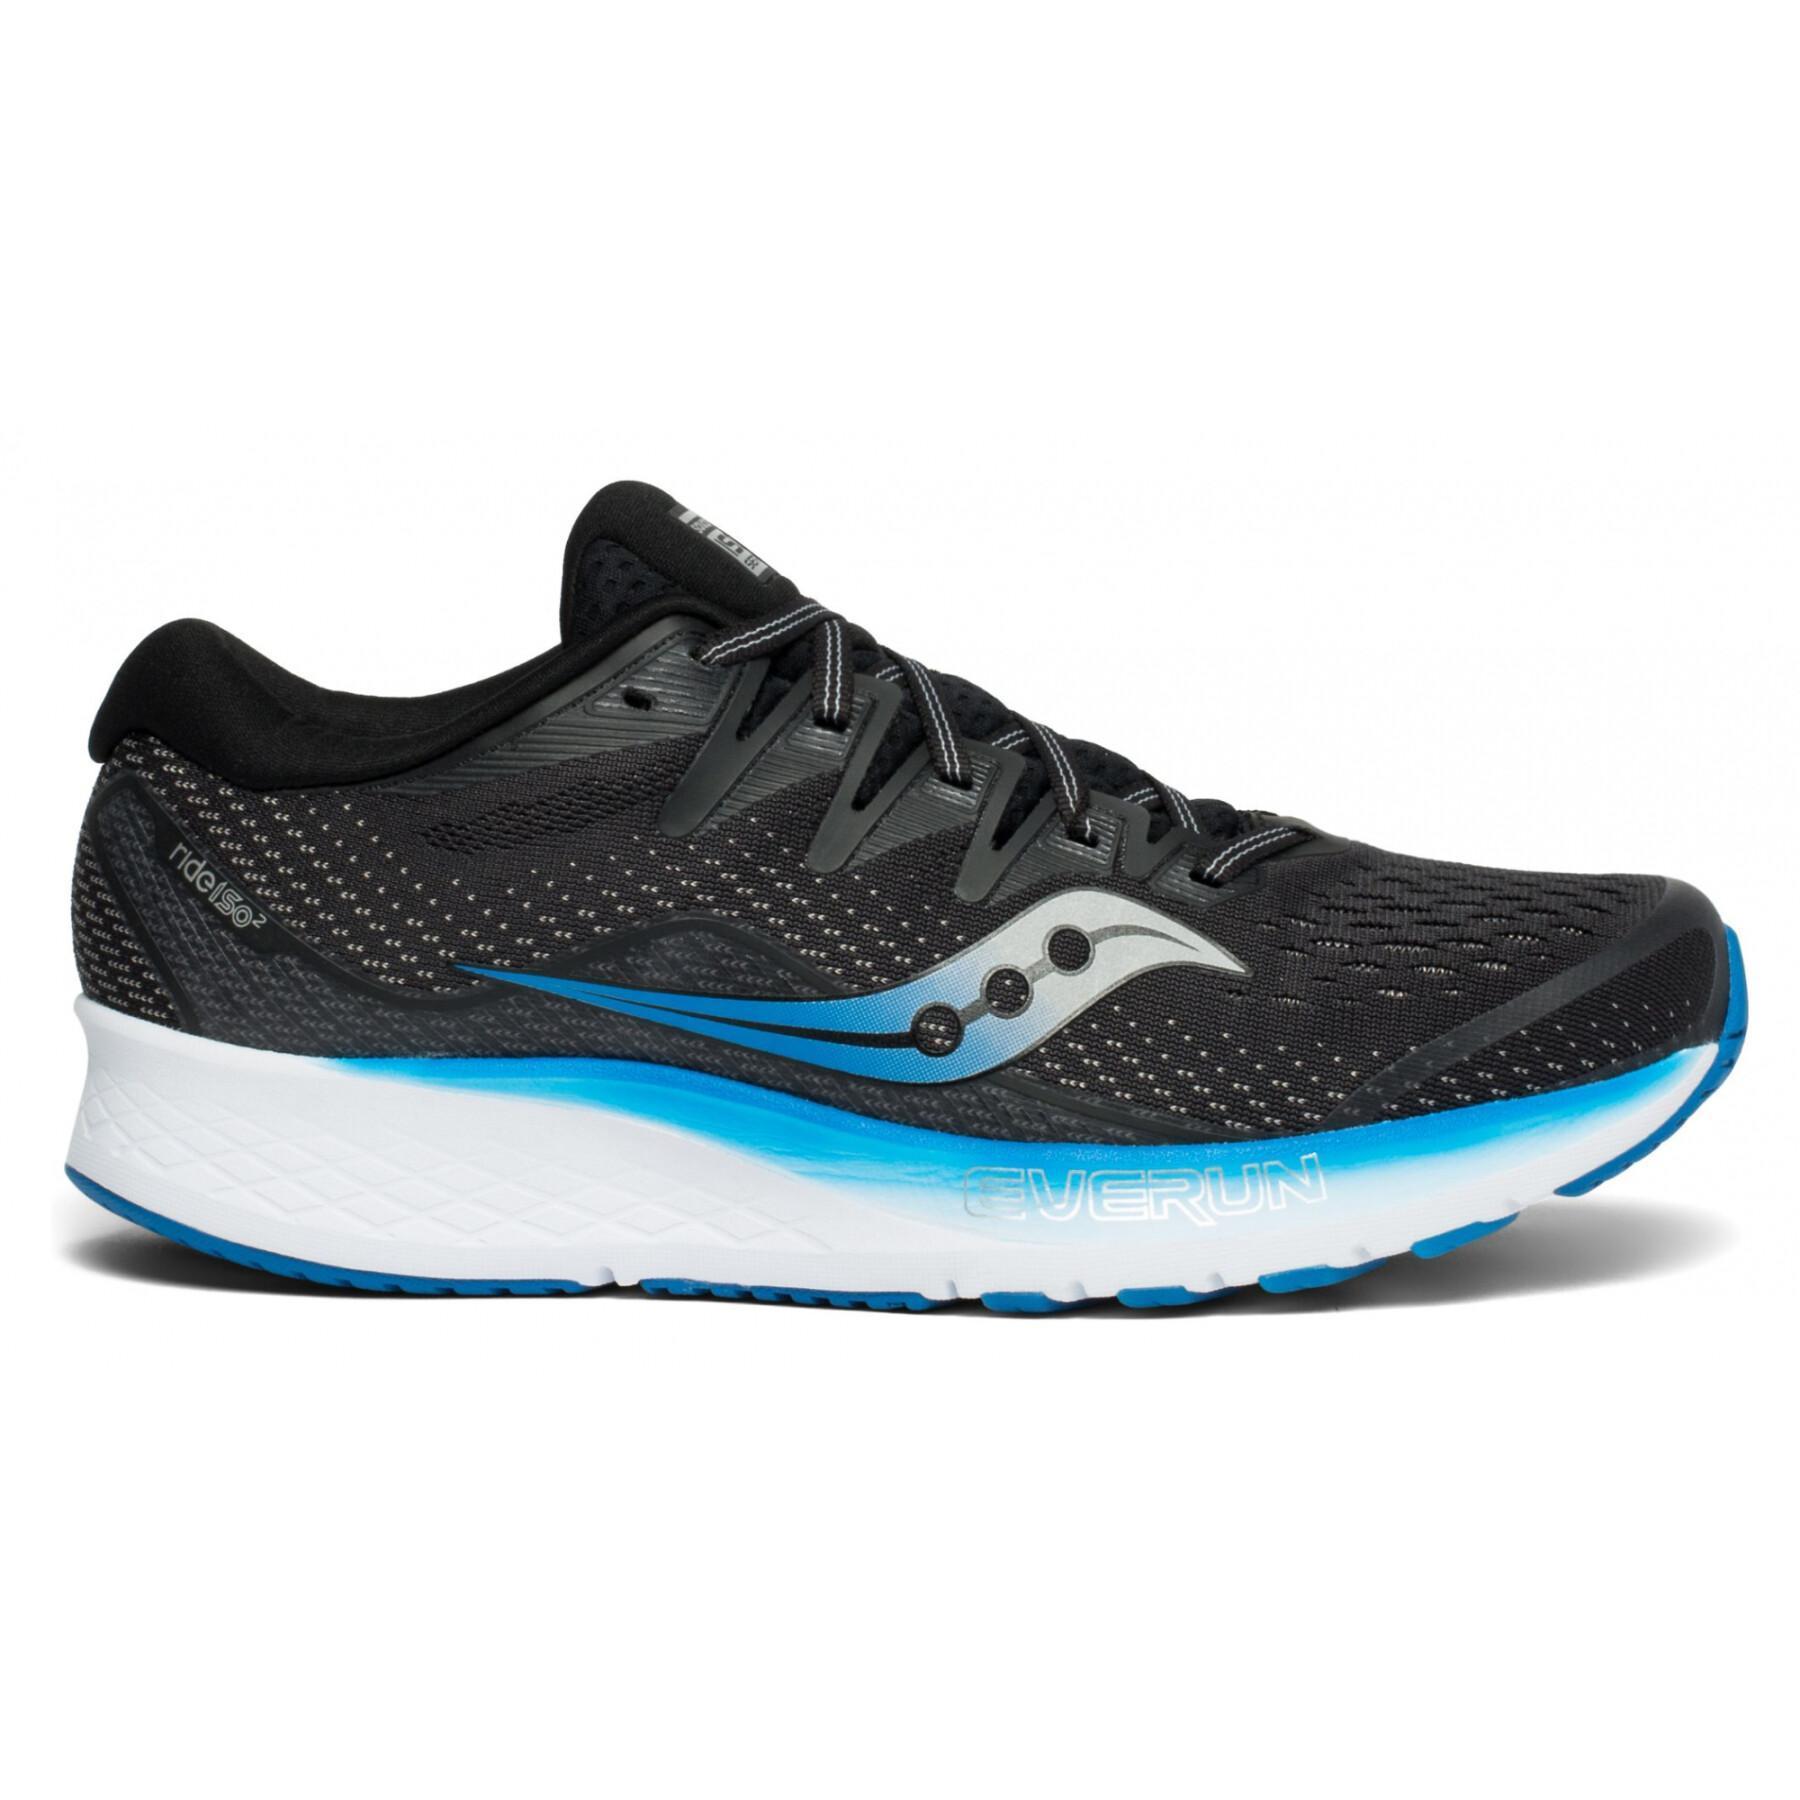 Shoes Saucony Ride Iso 2